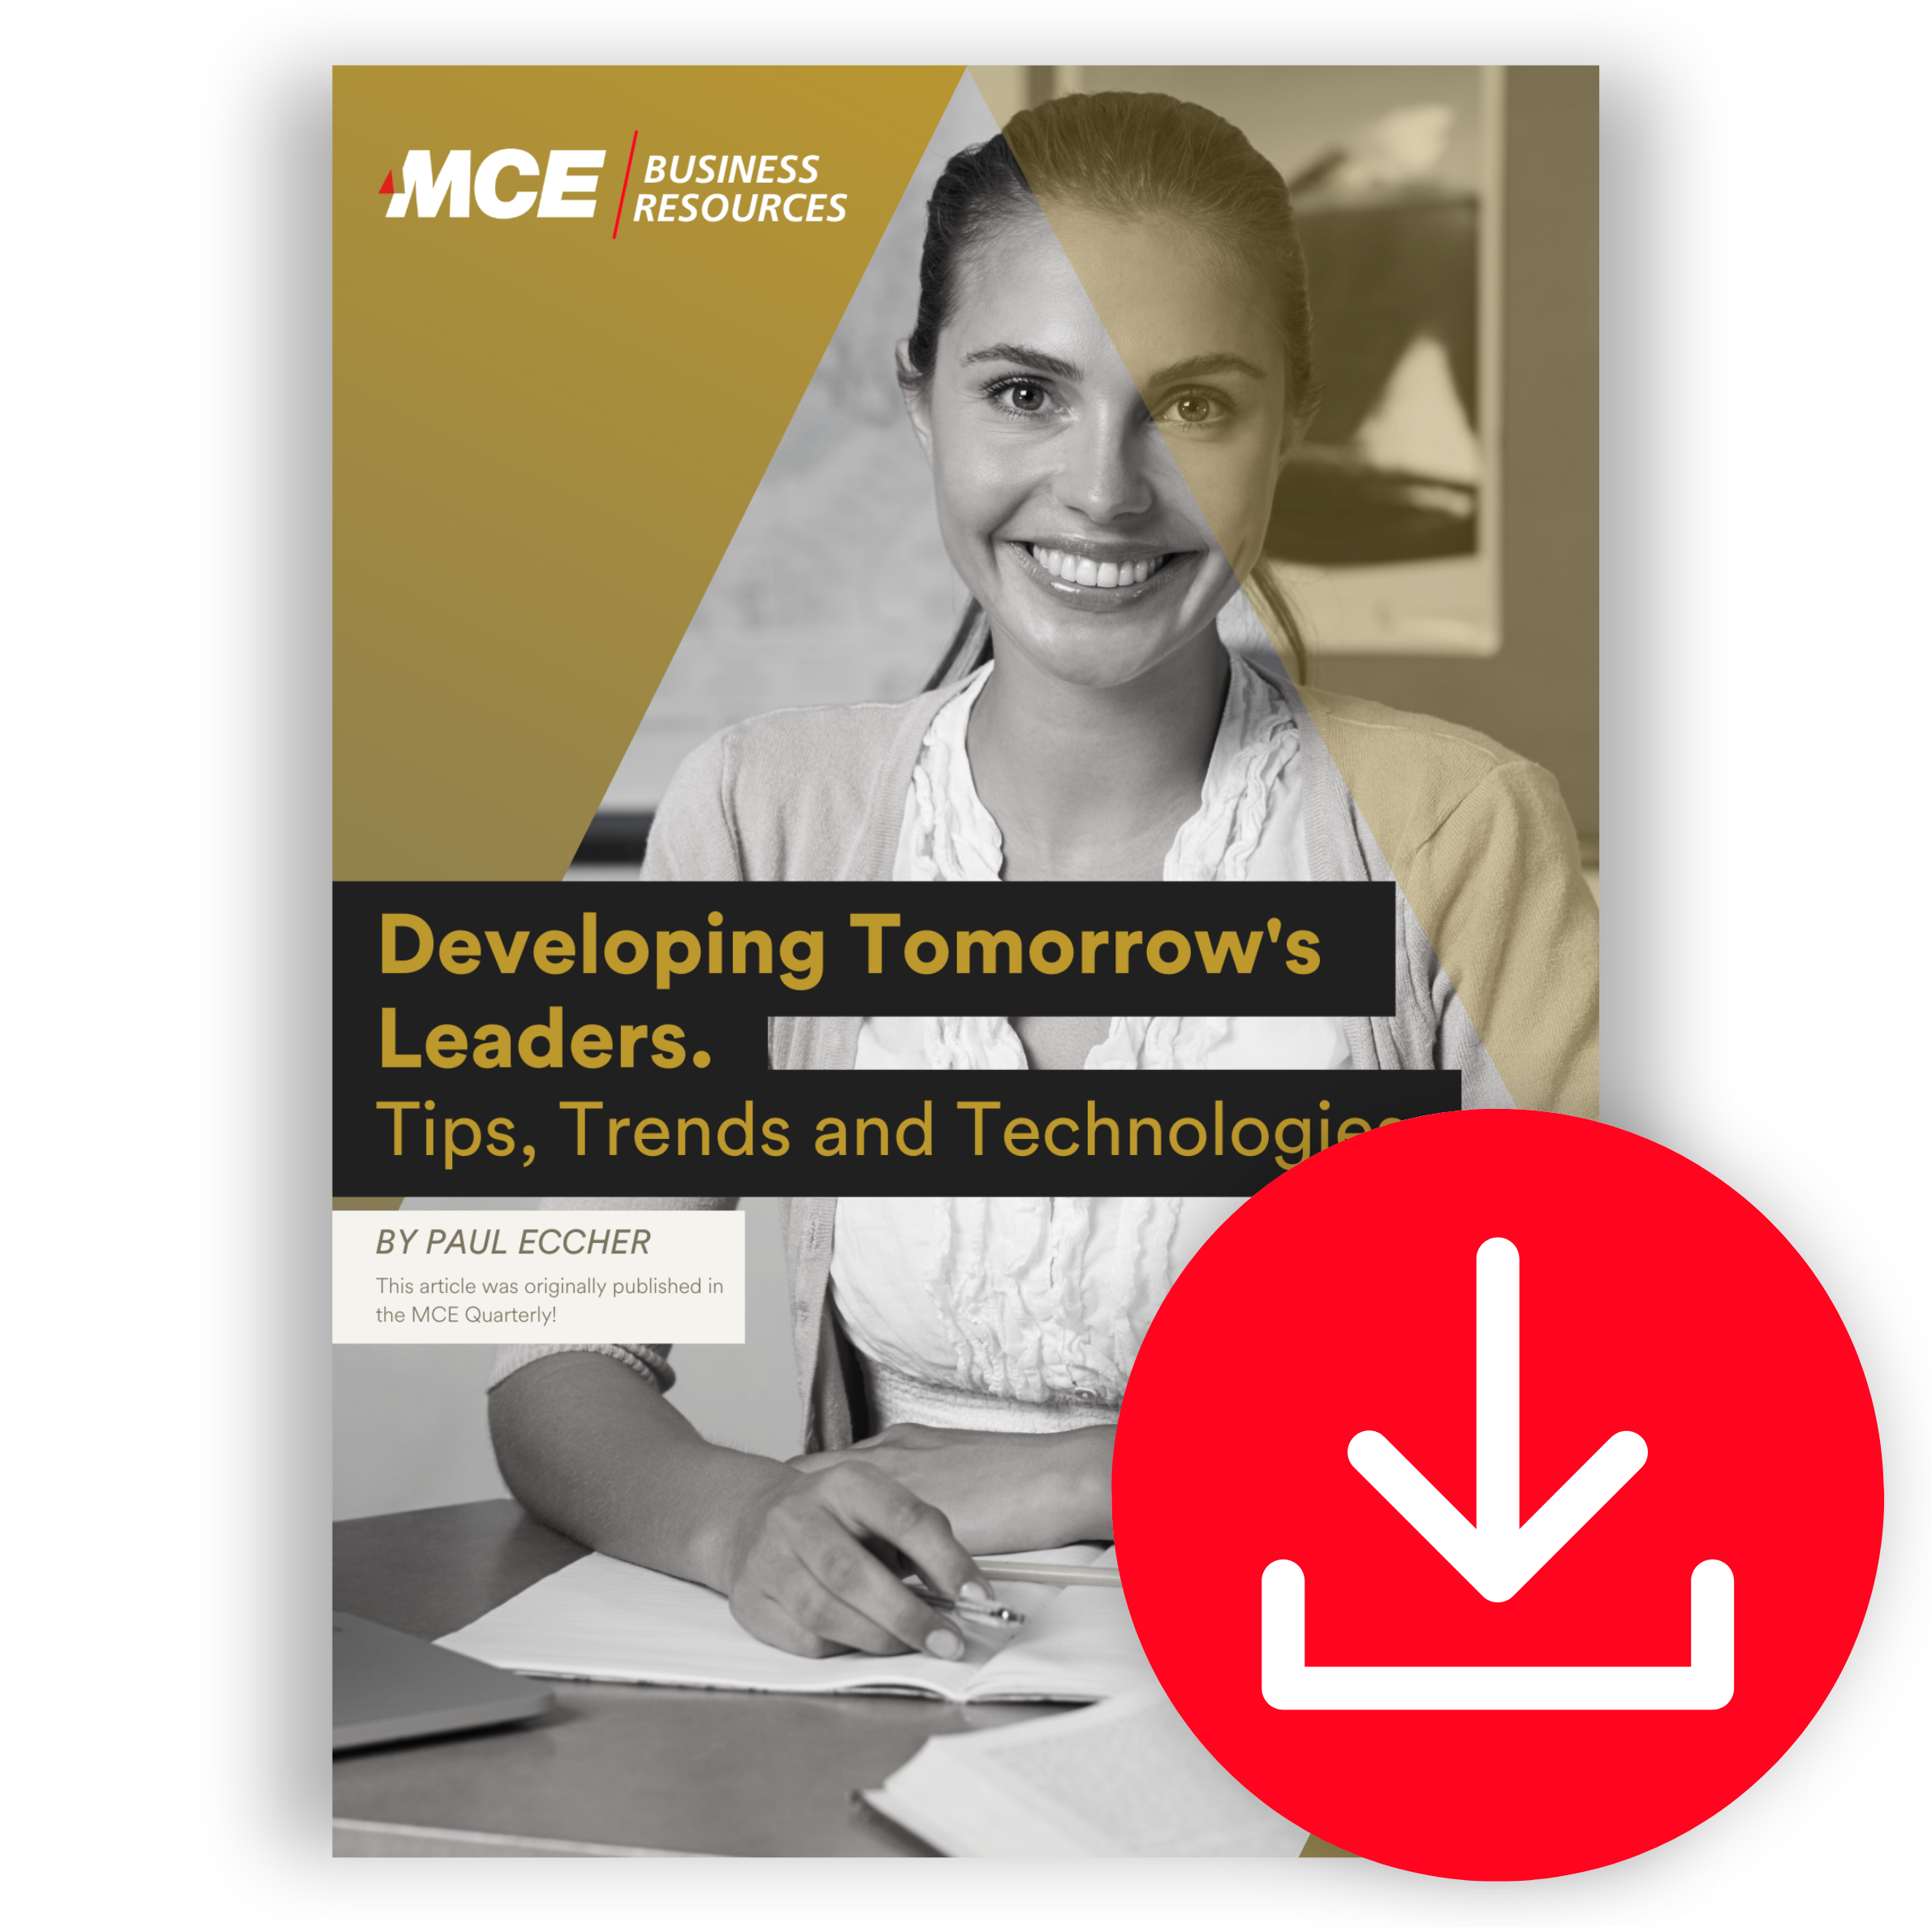 Developing Tomorrow’s Leaders: Tips, Trends, and Technologies